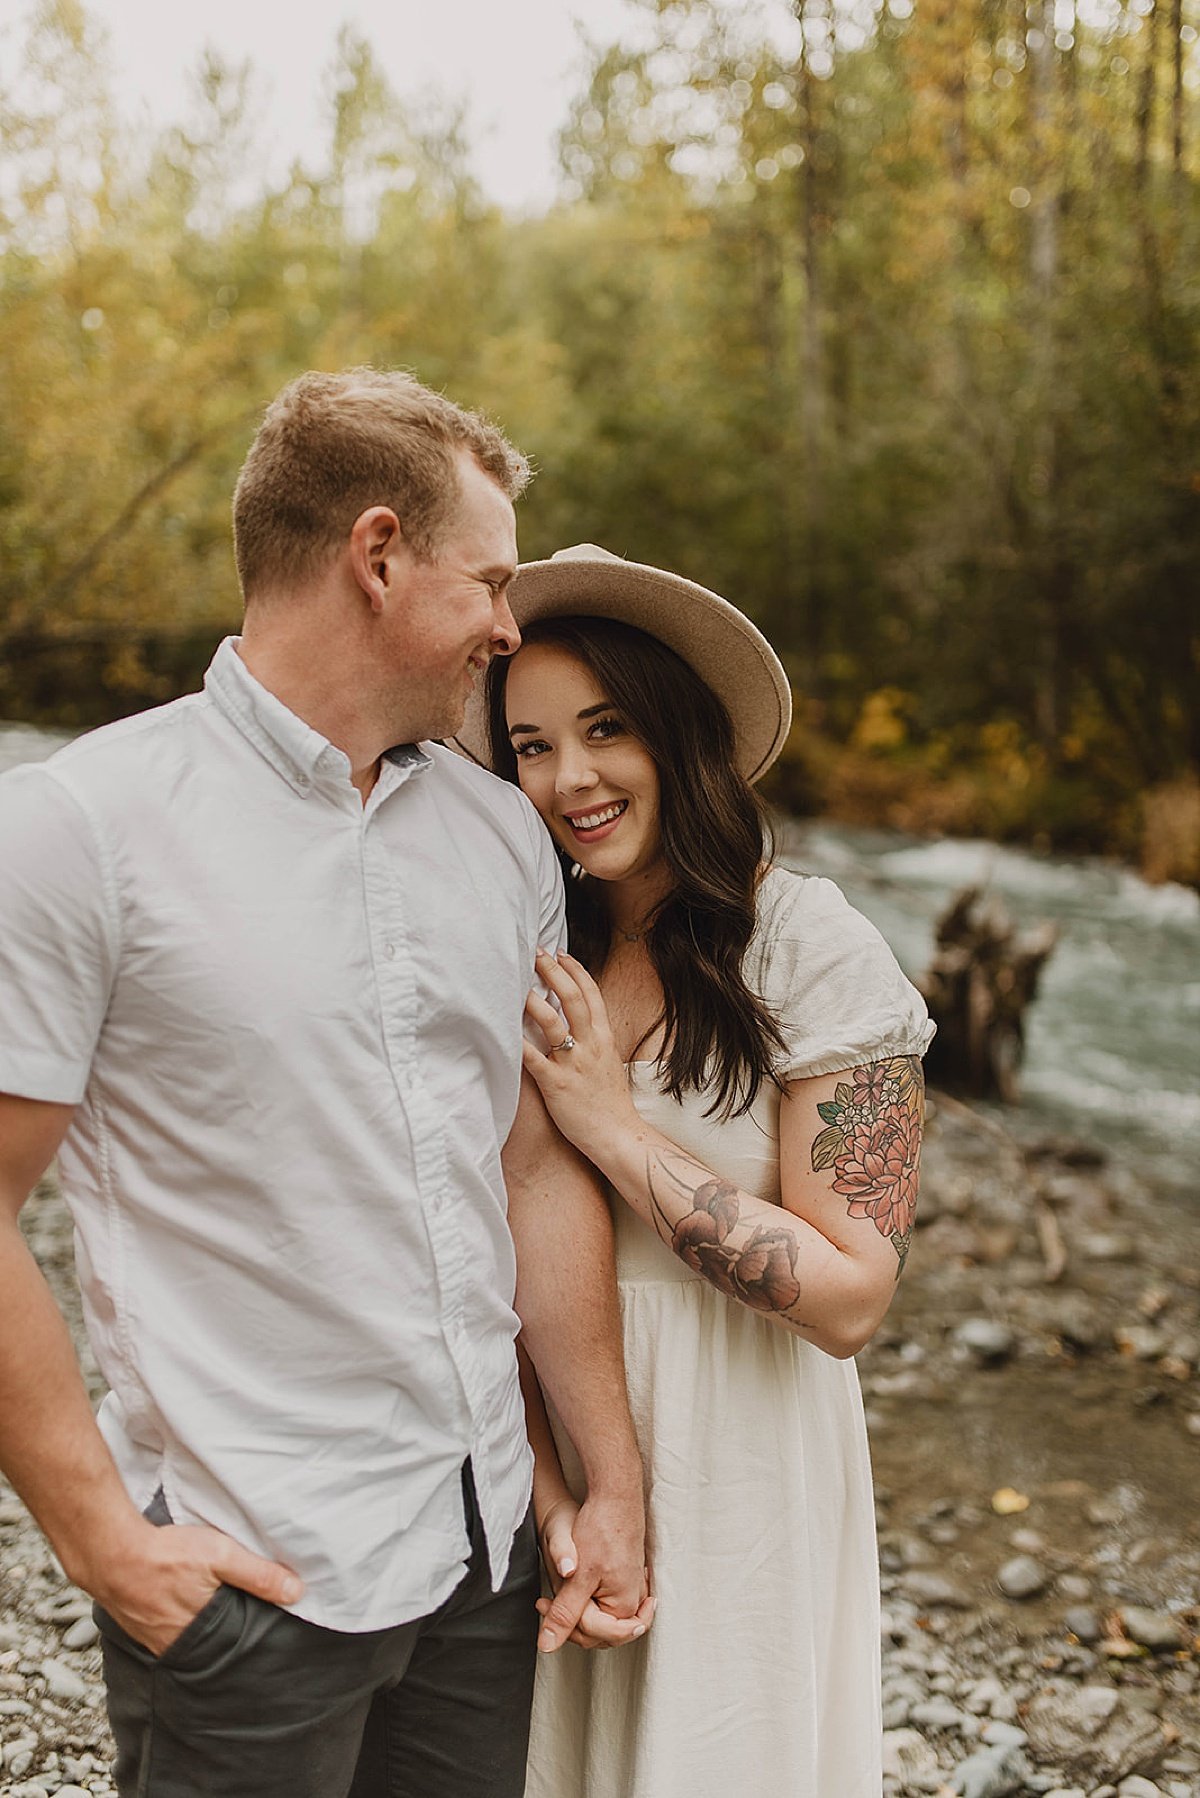  Couples smile in outdoor engagement shoot by riverbank 